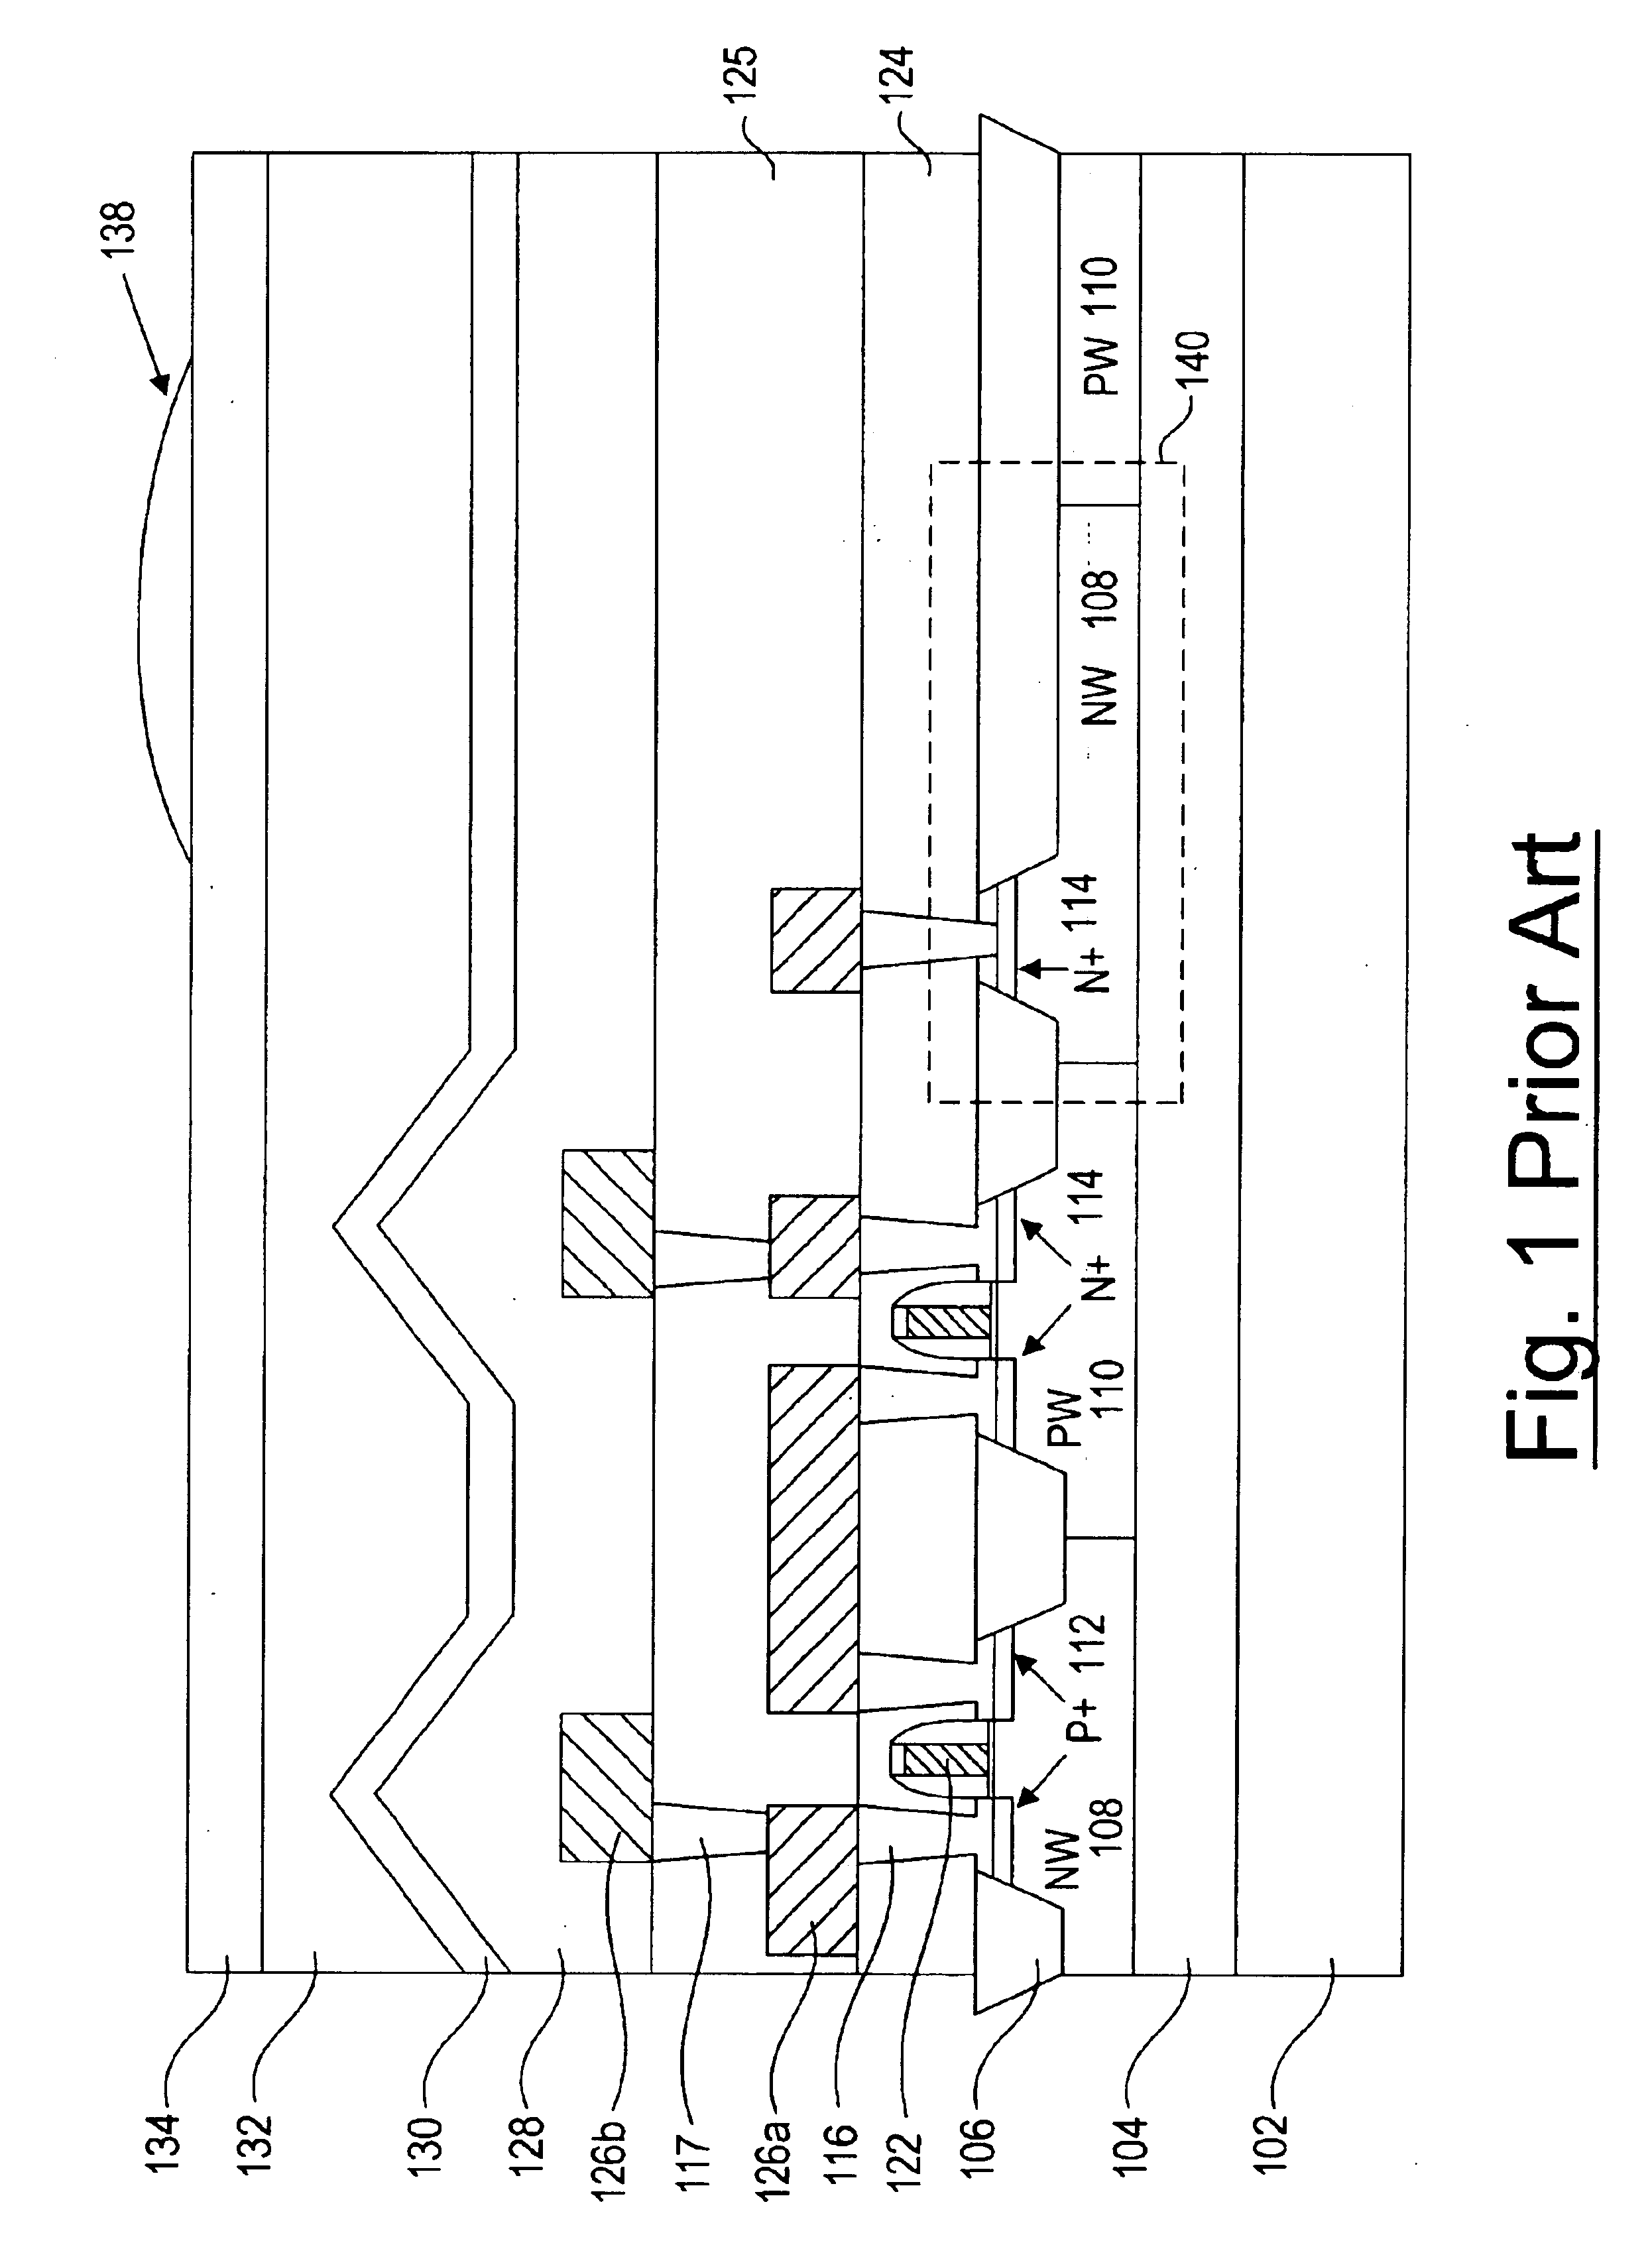 CMOS image sensor with substrate noise barrier